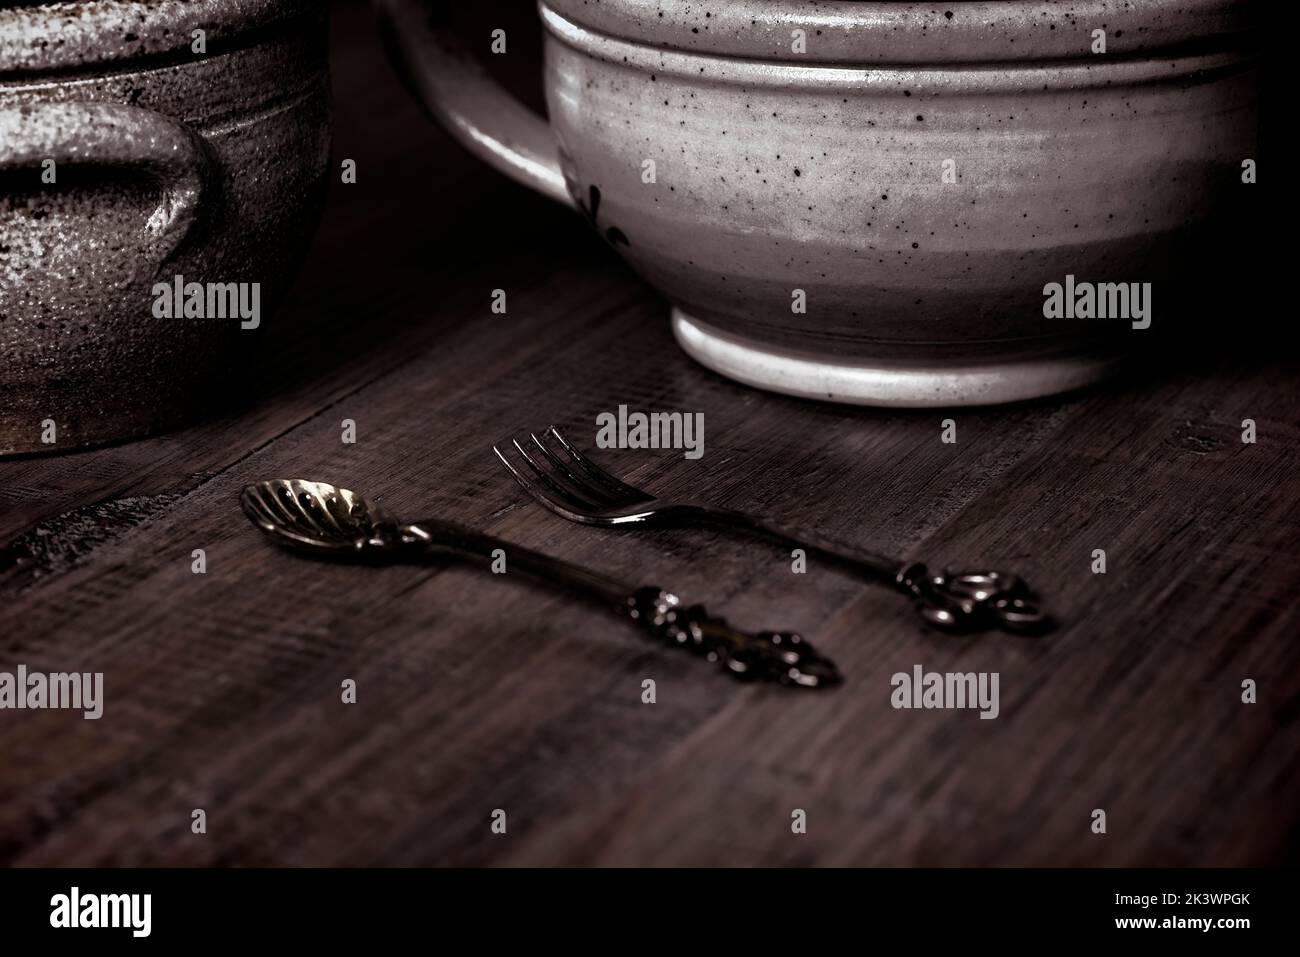 Antique presentation of vintage pottery and utensils, displayed on wooden surface. Stock Photo